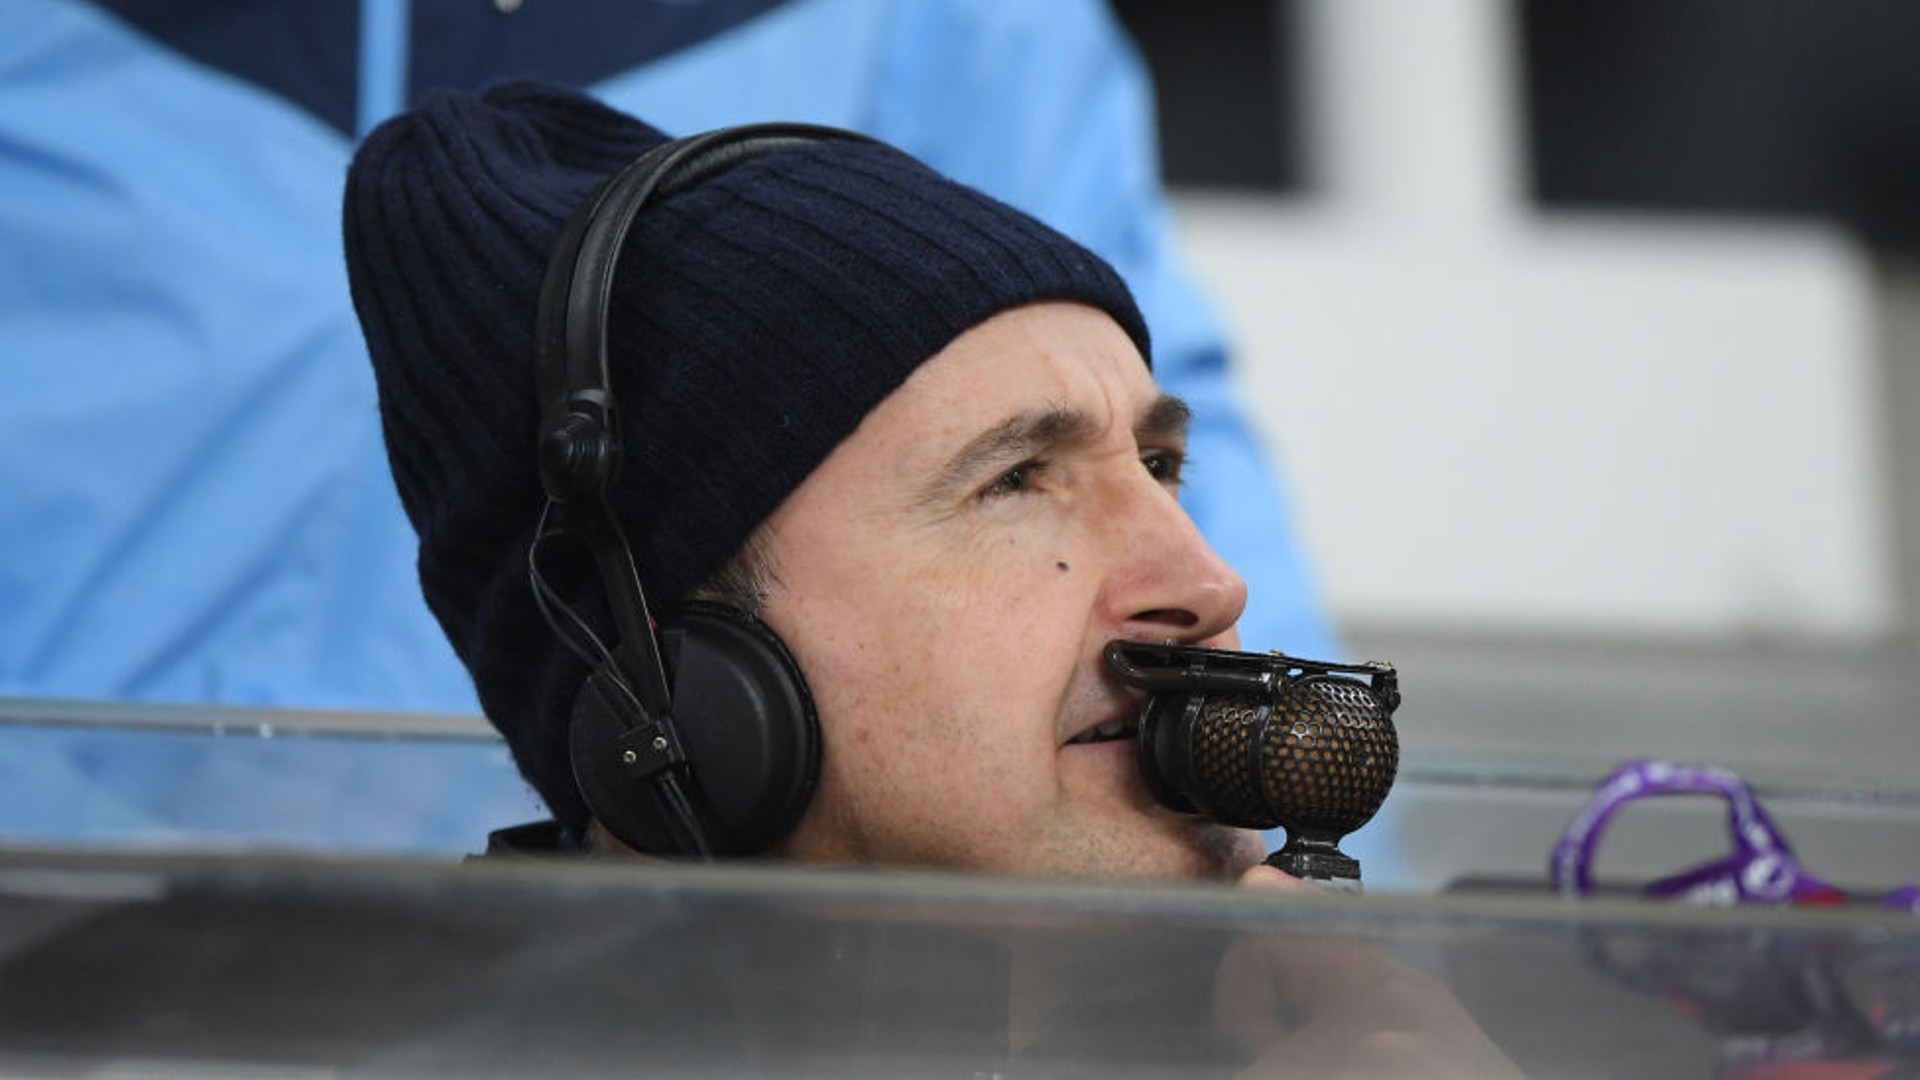 AT THE MICROPHONE: John Murray on duty covering City's game at Newcastle United back in 2019